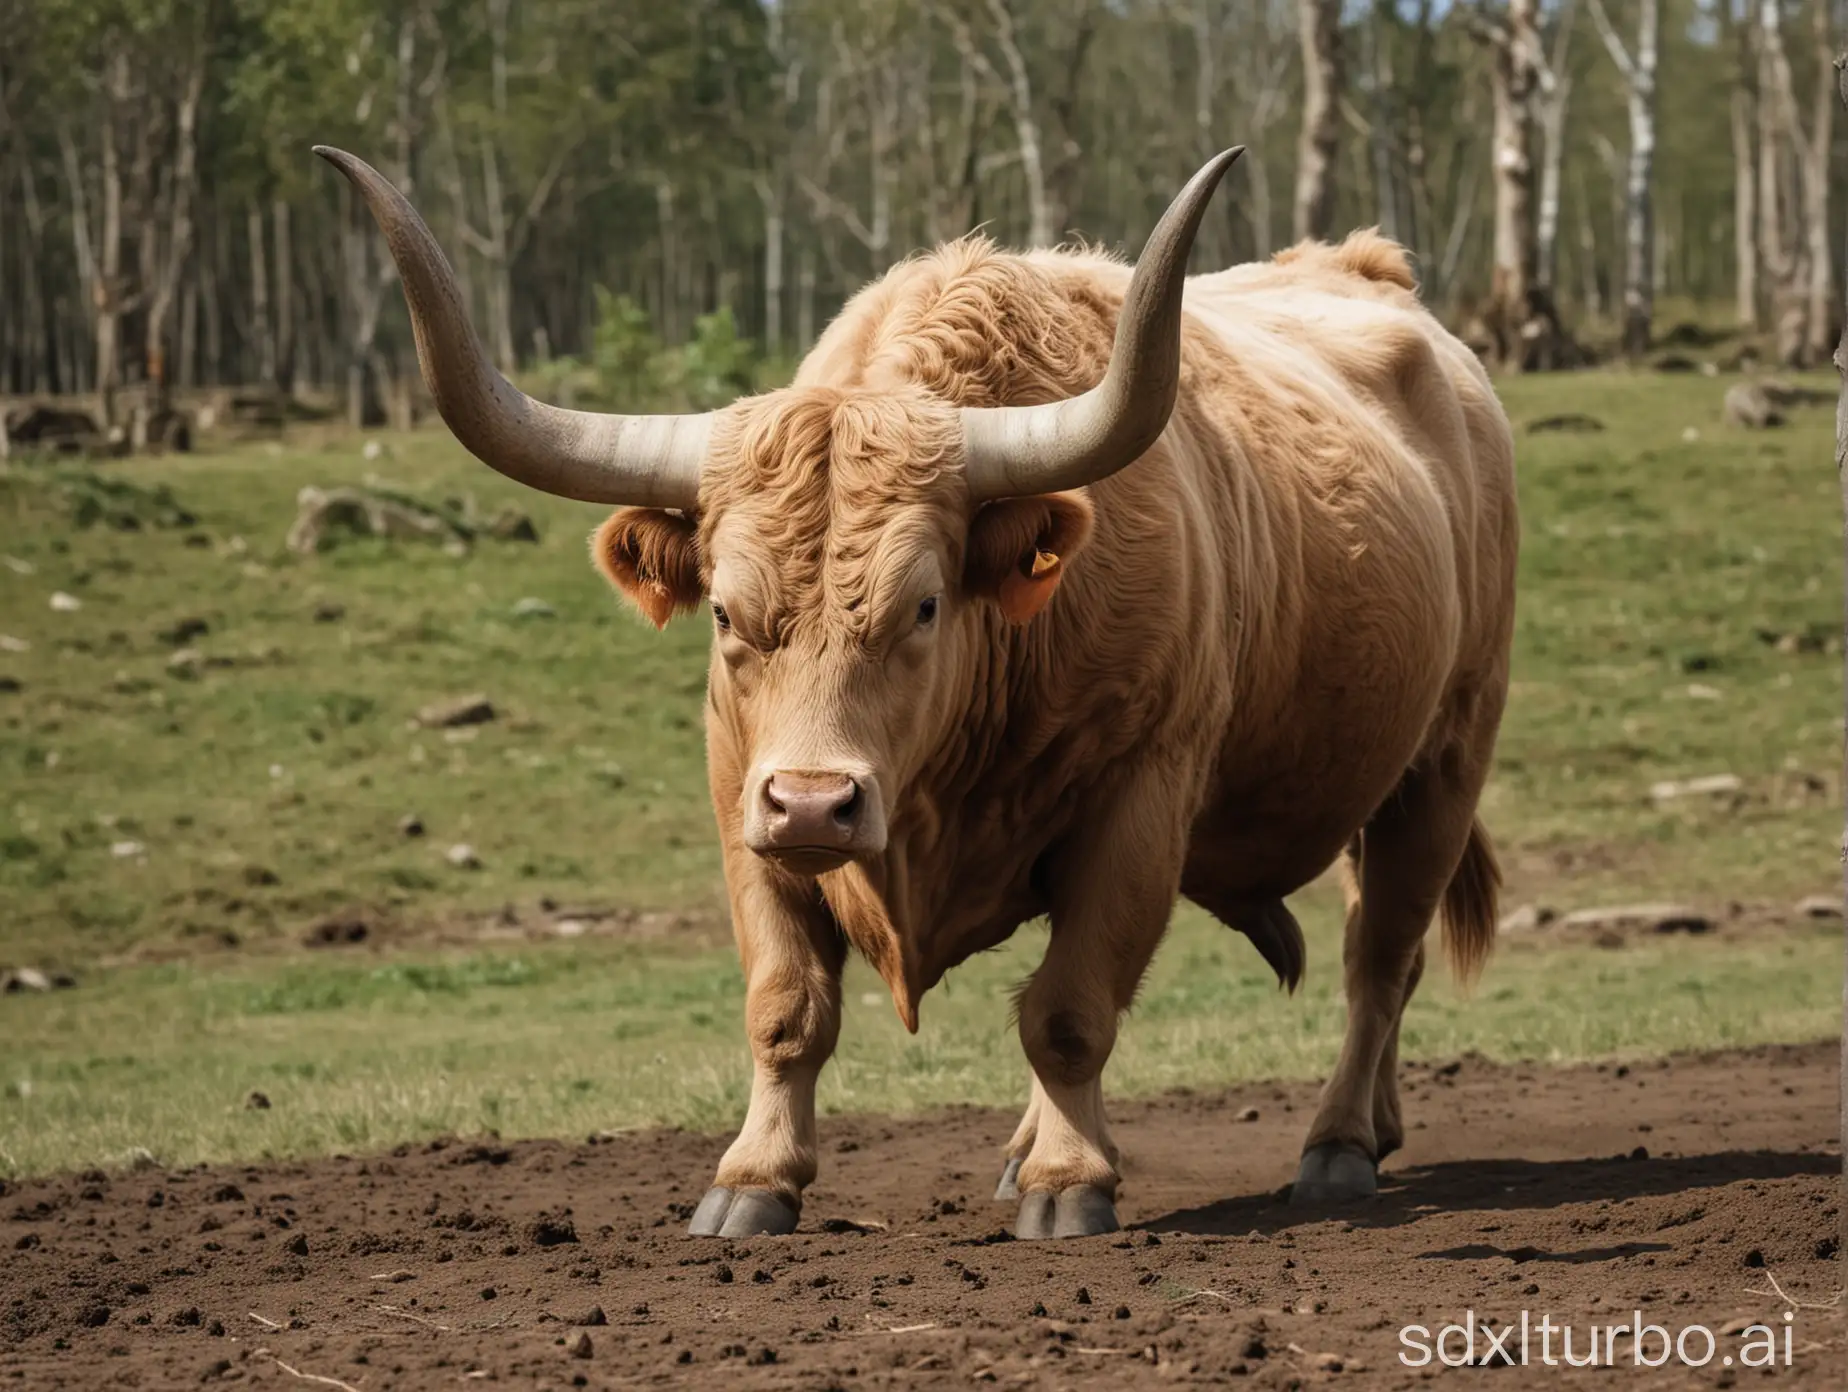 Bull-with-Horns-Curved-Towards-the-Ground